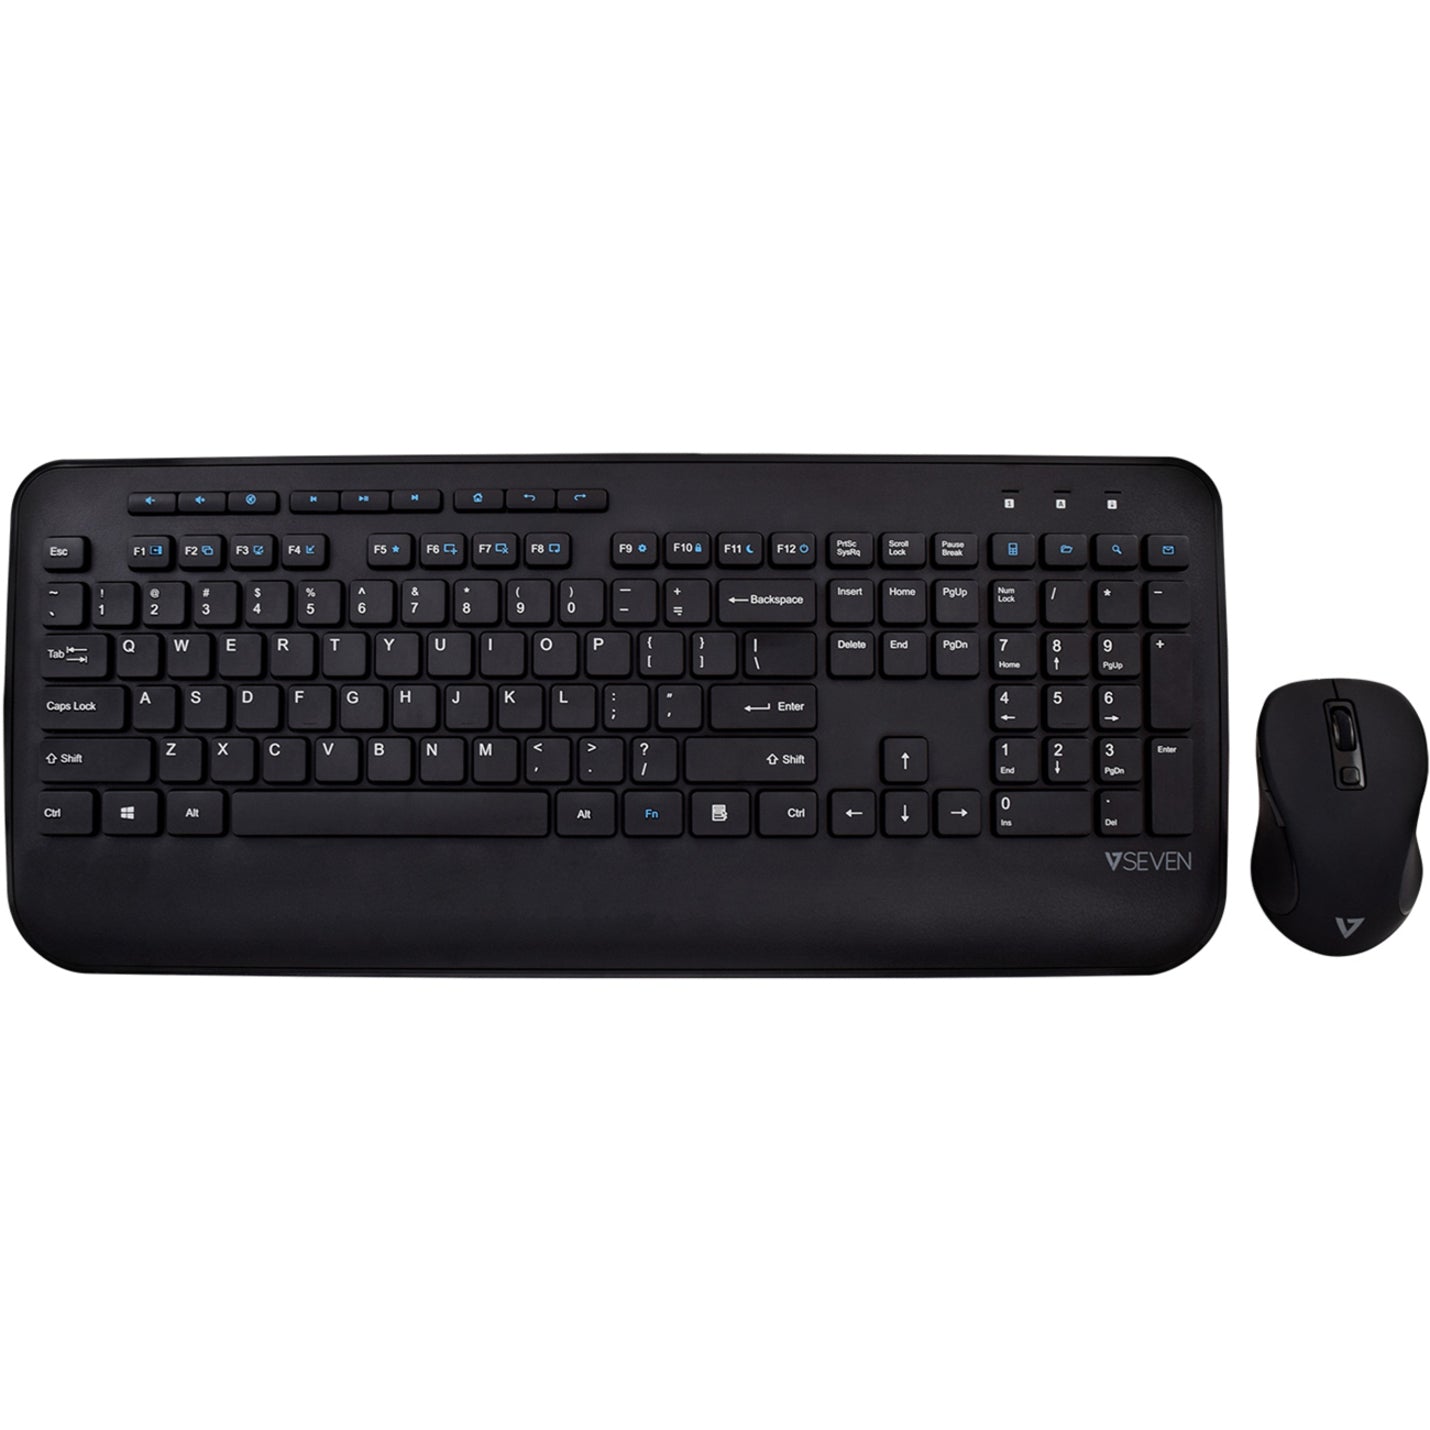 V7 CKW300US Full Size/Palm Rest English QWERTY - Black, Wireless RF Keyboard & Mouse with Internet Key, Email, Volume Control, My Music, Play/Pause, 6 Buttons, 1600 dpi, AA Battery Supported